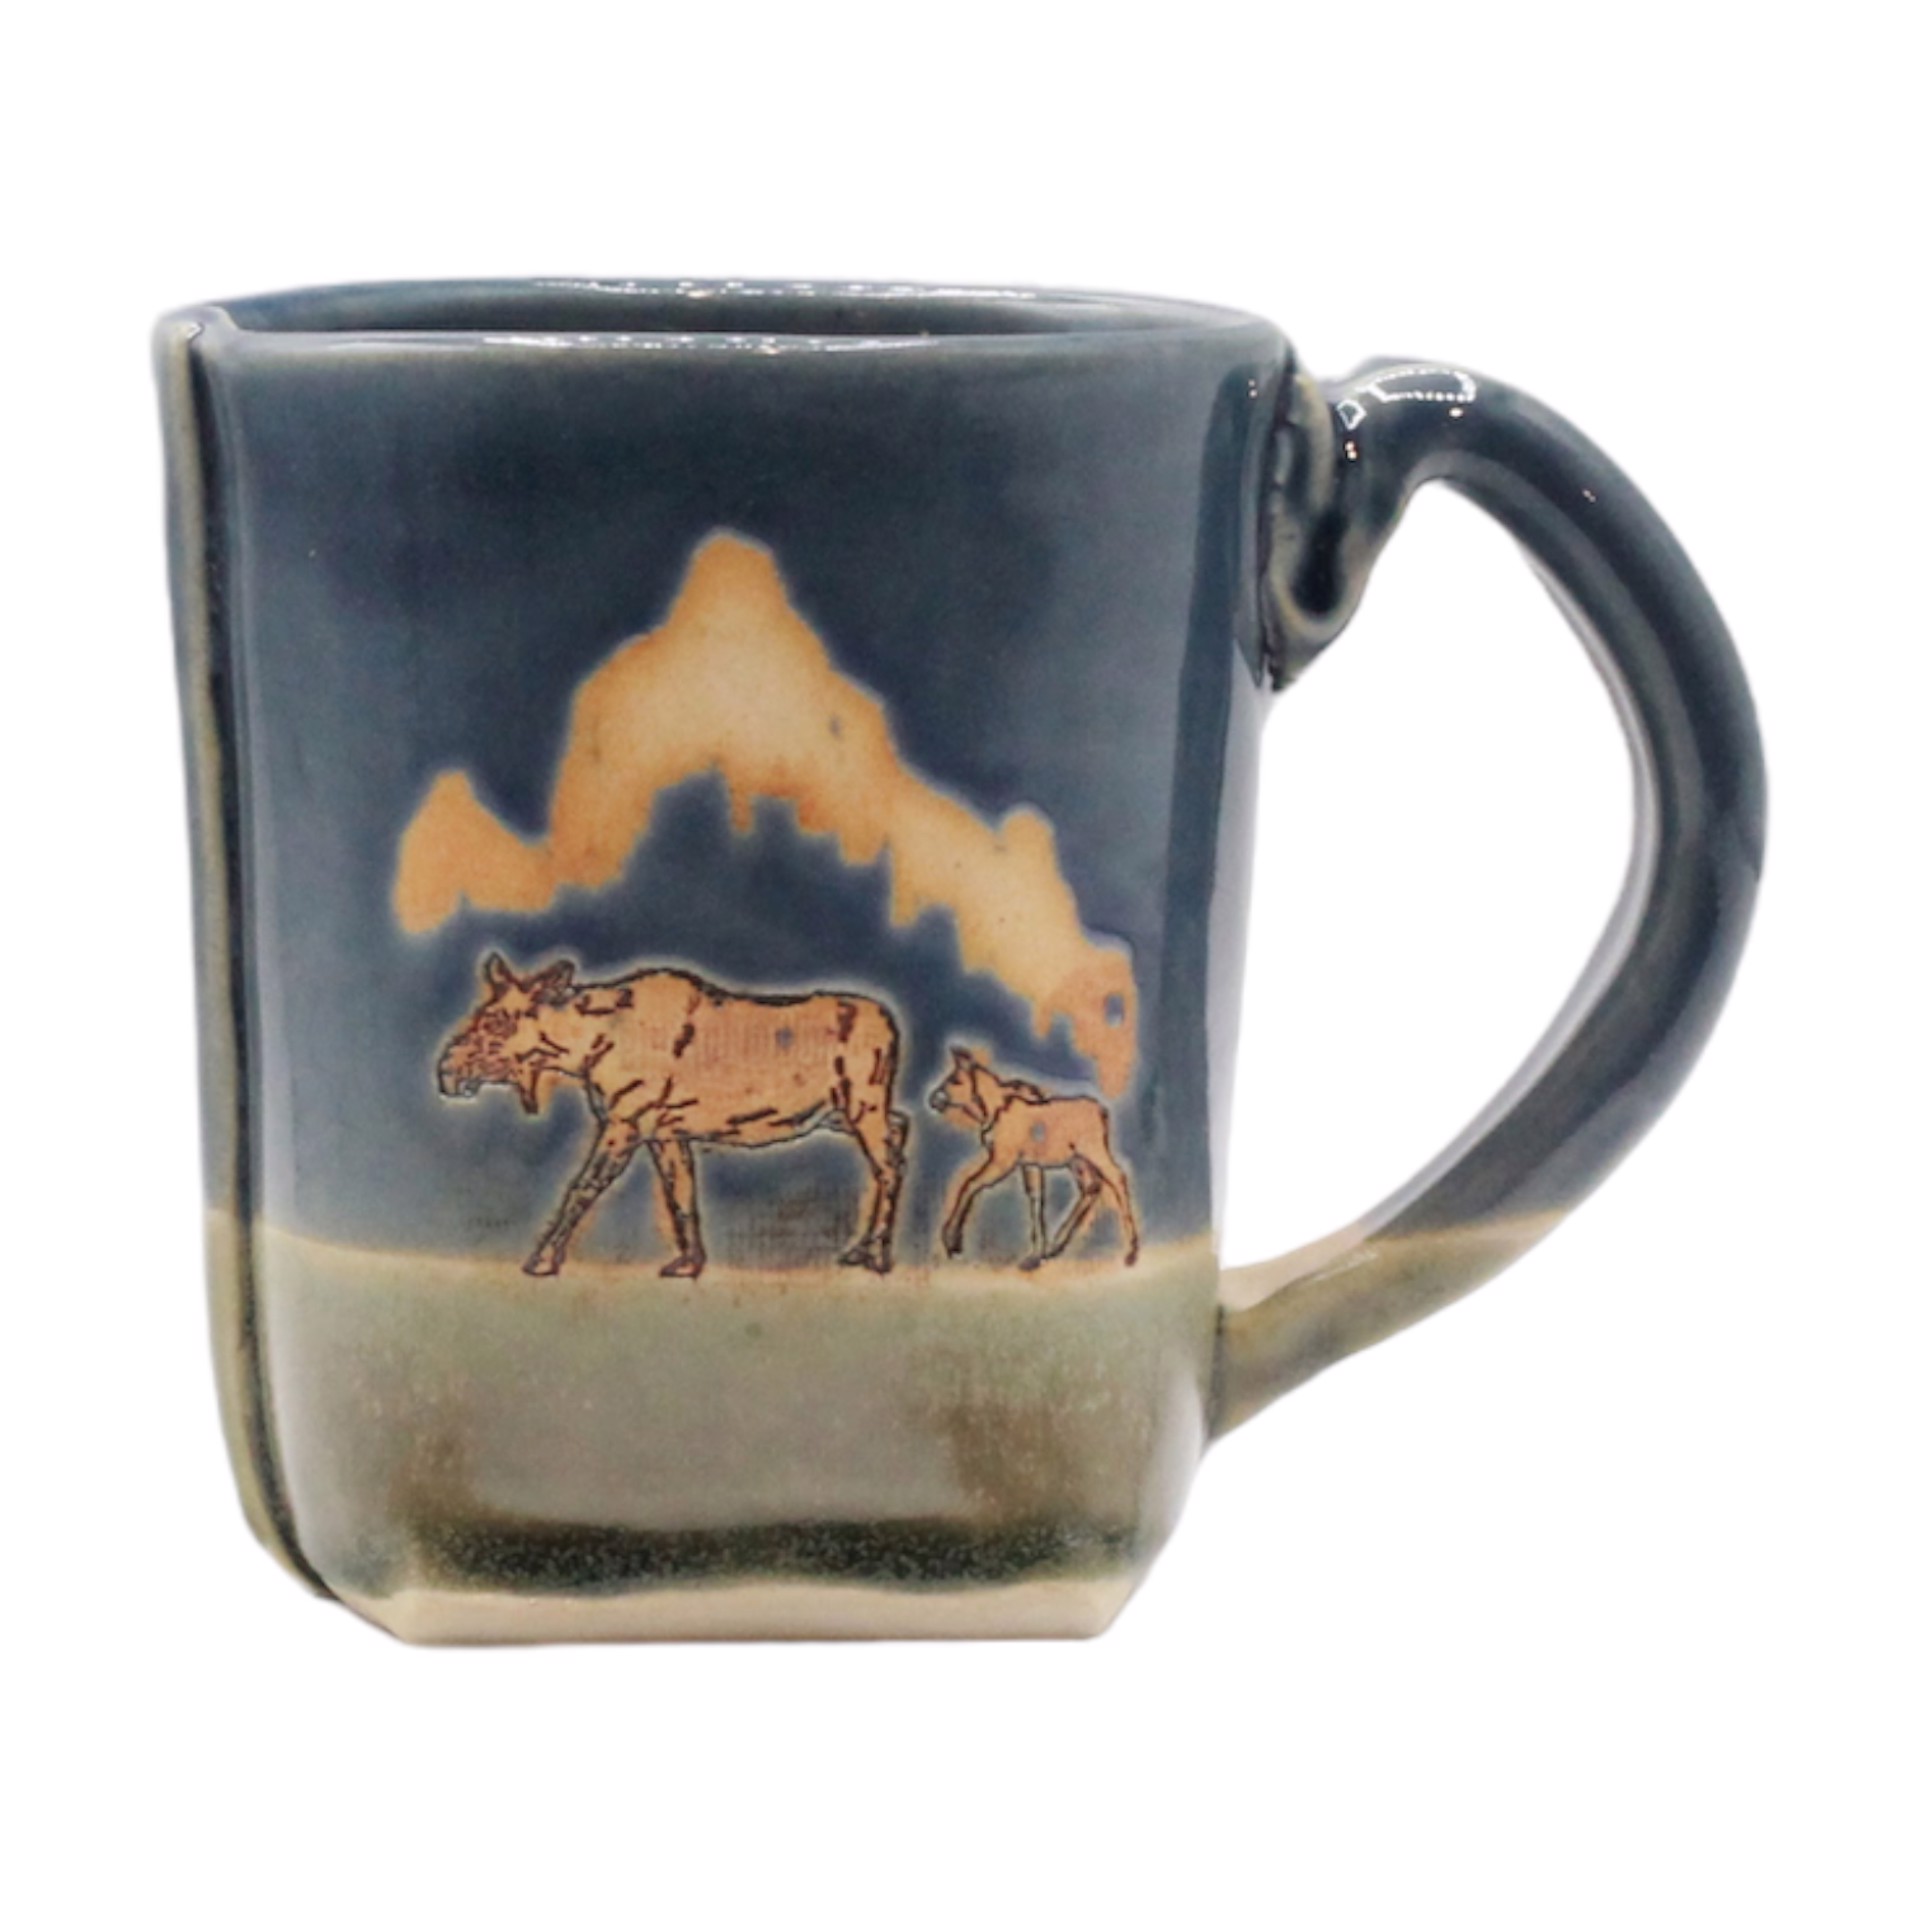 Mother Moose Mug by Colleen Deiss